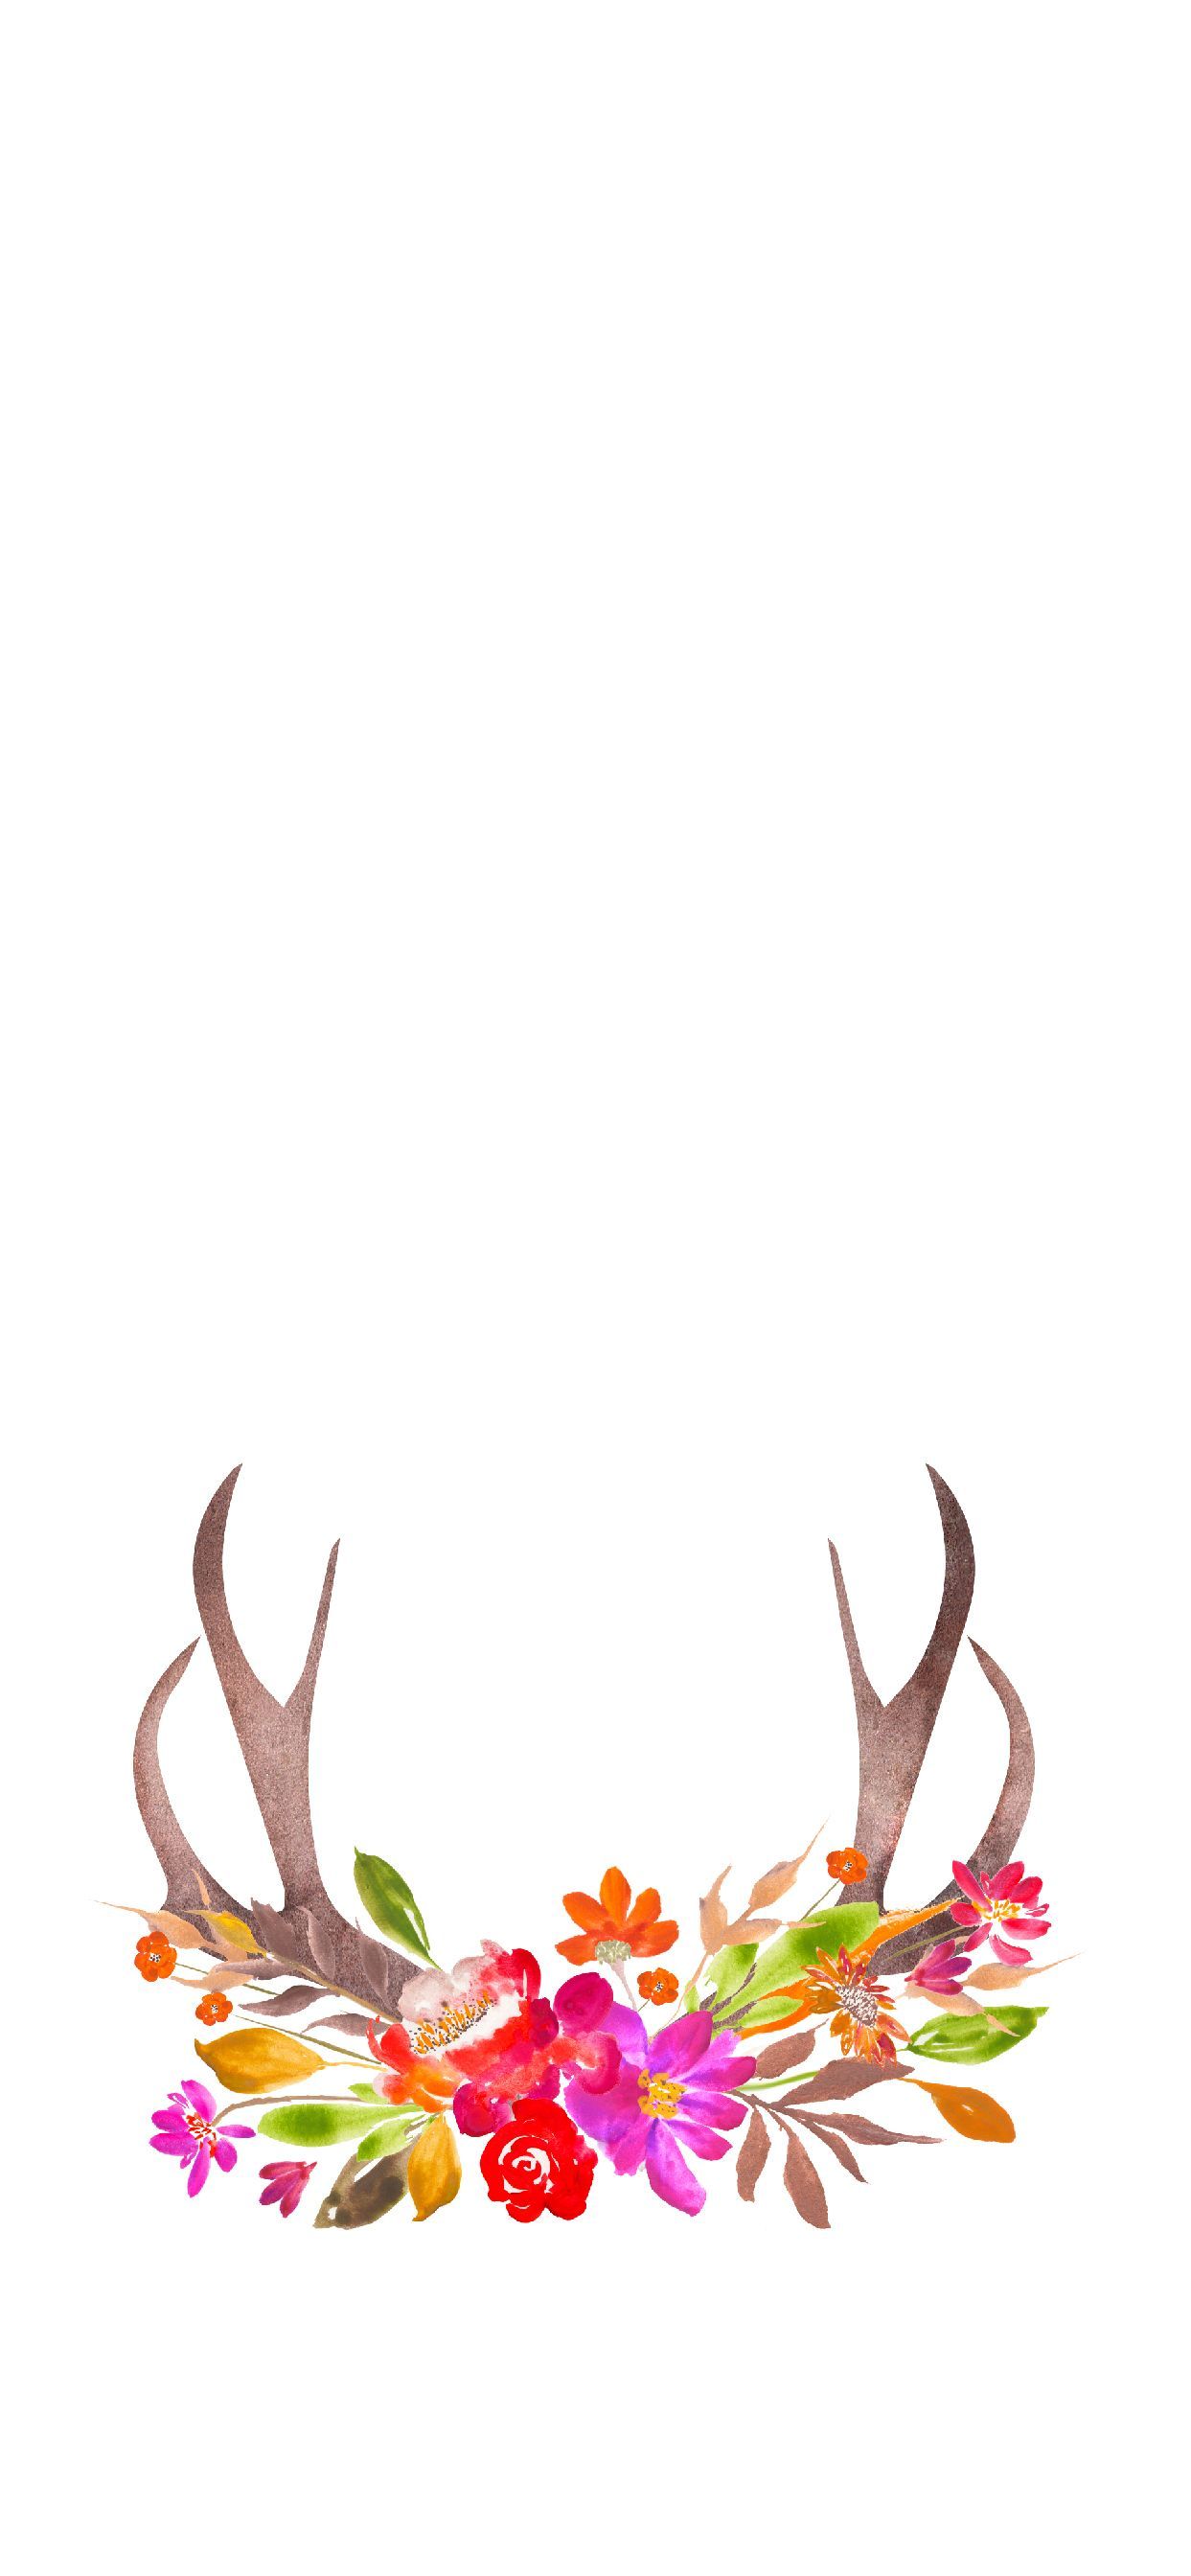 Fall Floral Antler Wallpaper for iPhone. Fall wallpaper, Floral wallpaper iphone, iPhone wallpaper fall